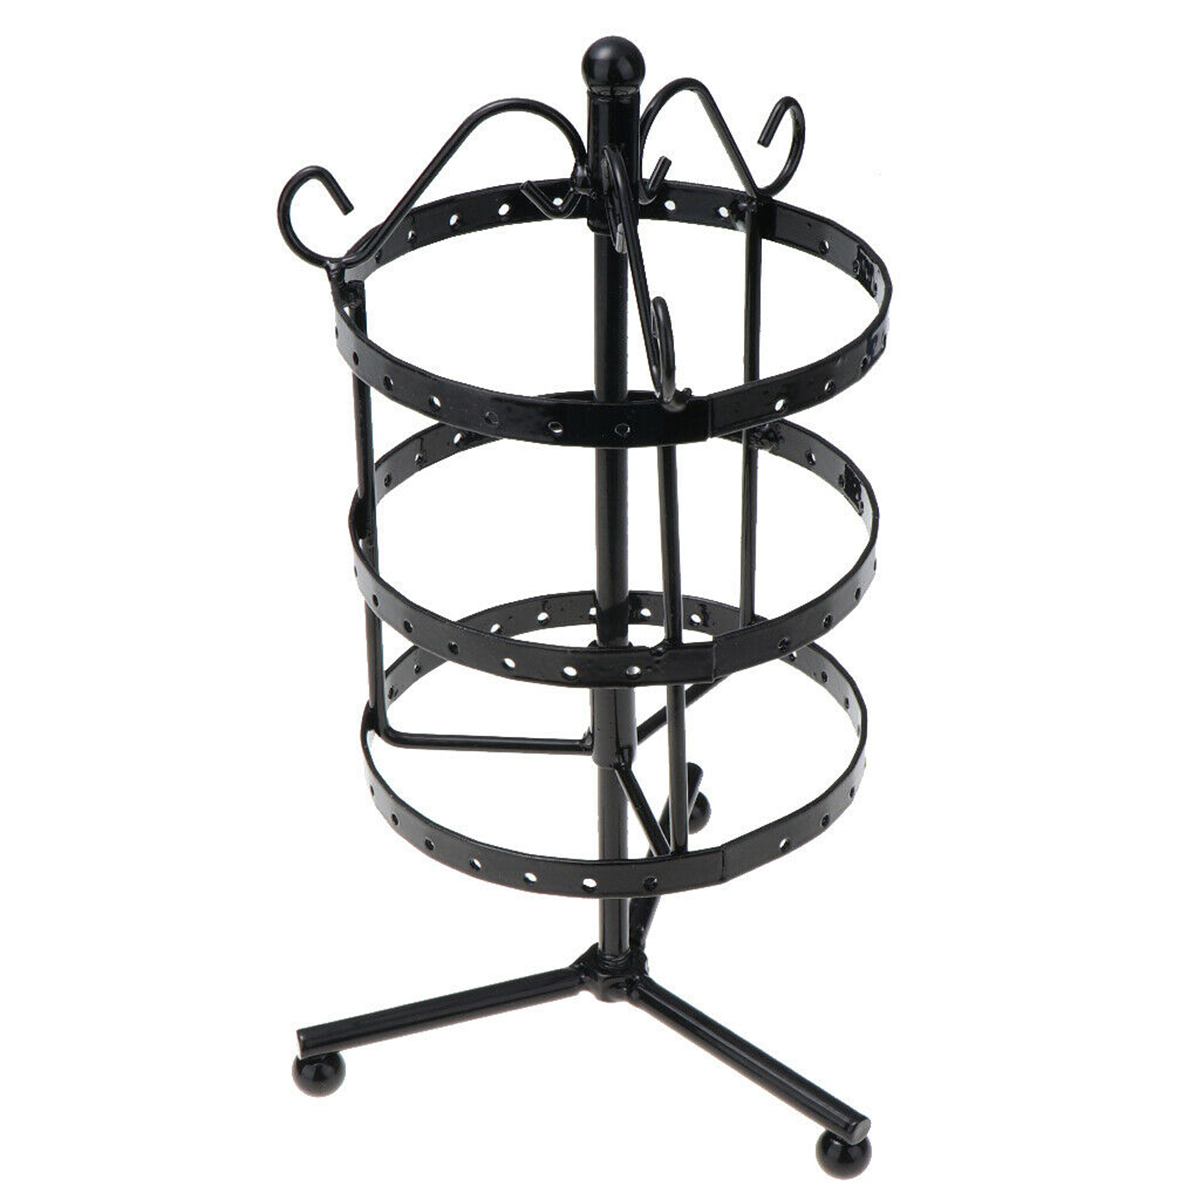 81-Holes-3-tiers-Rotating-Iron-Jewelry-Rack-Earrings-Rings-Display-Stand-Tools-Kit-1590310-1